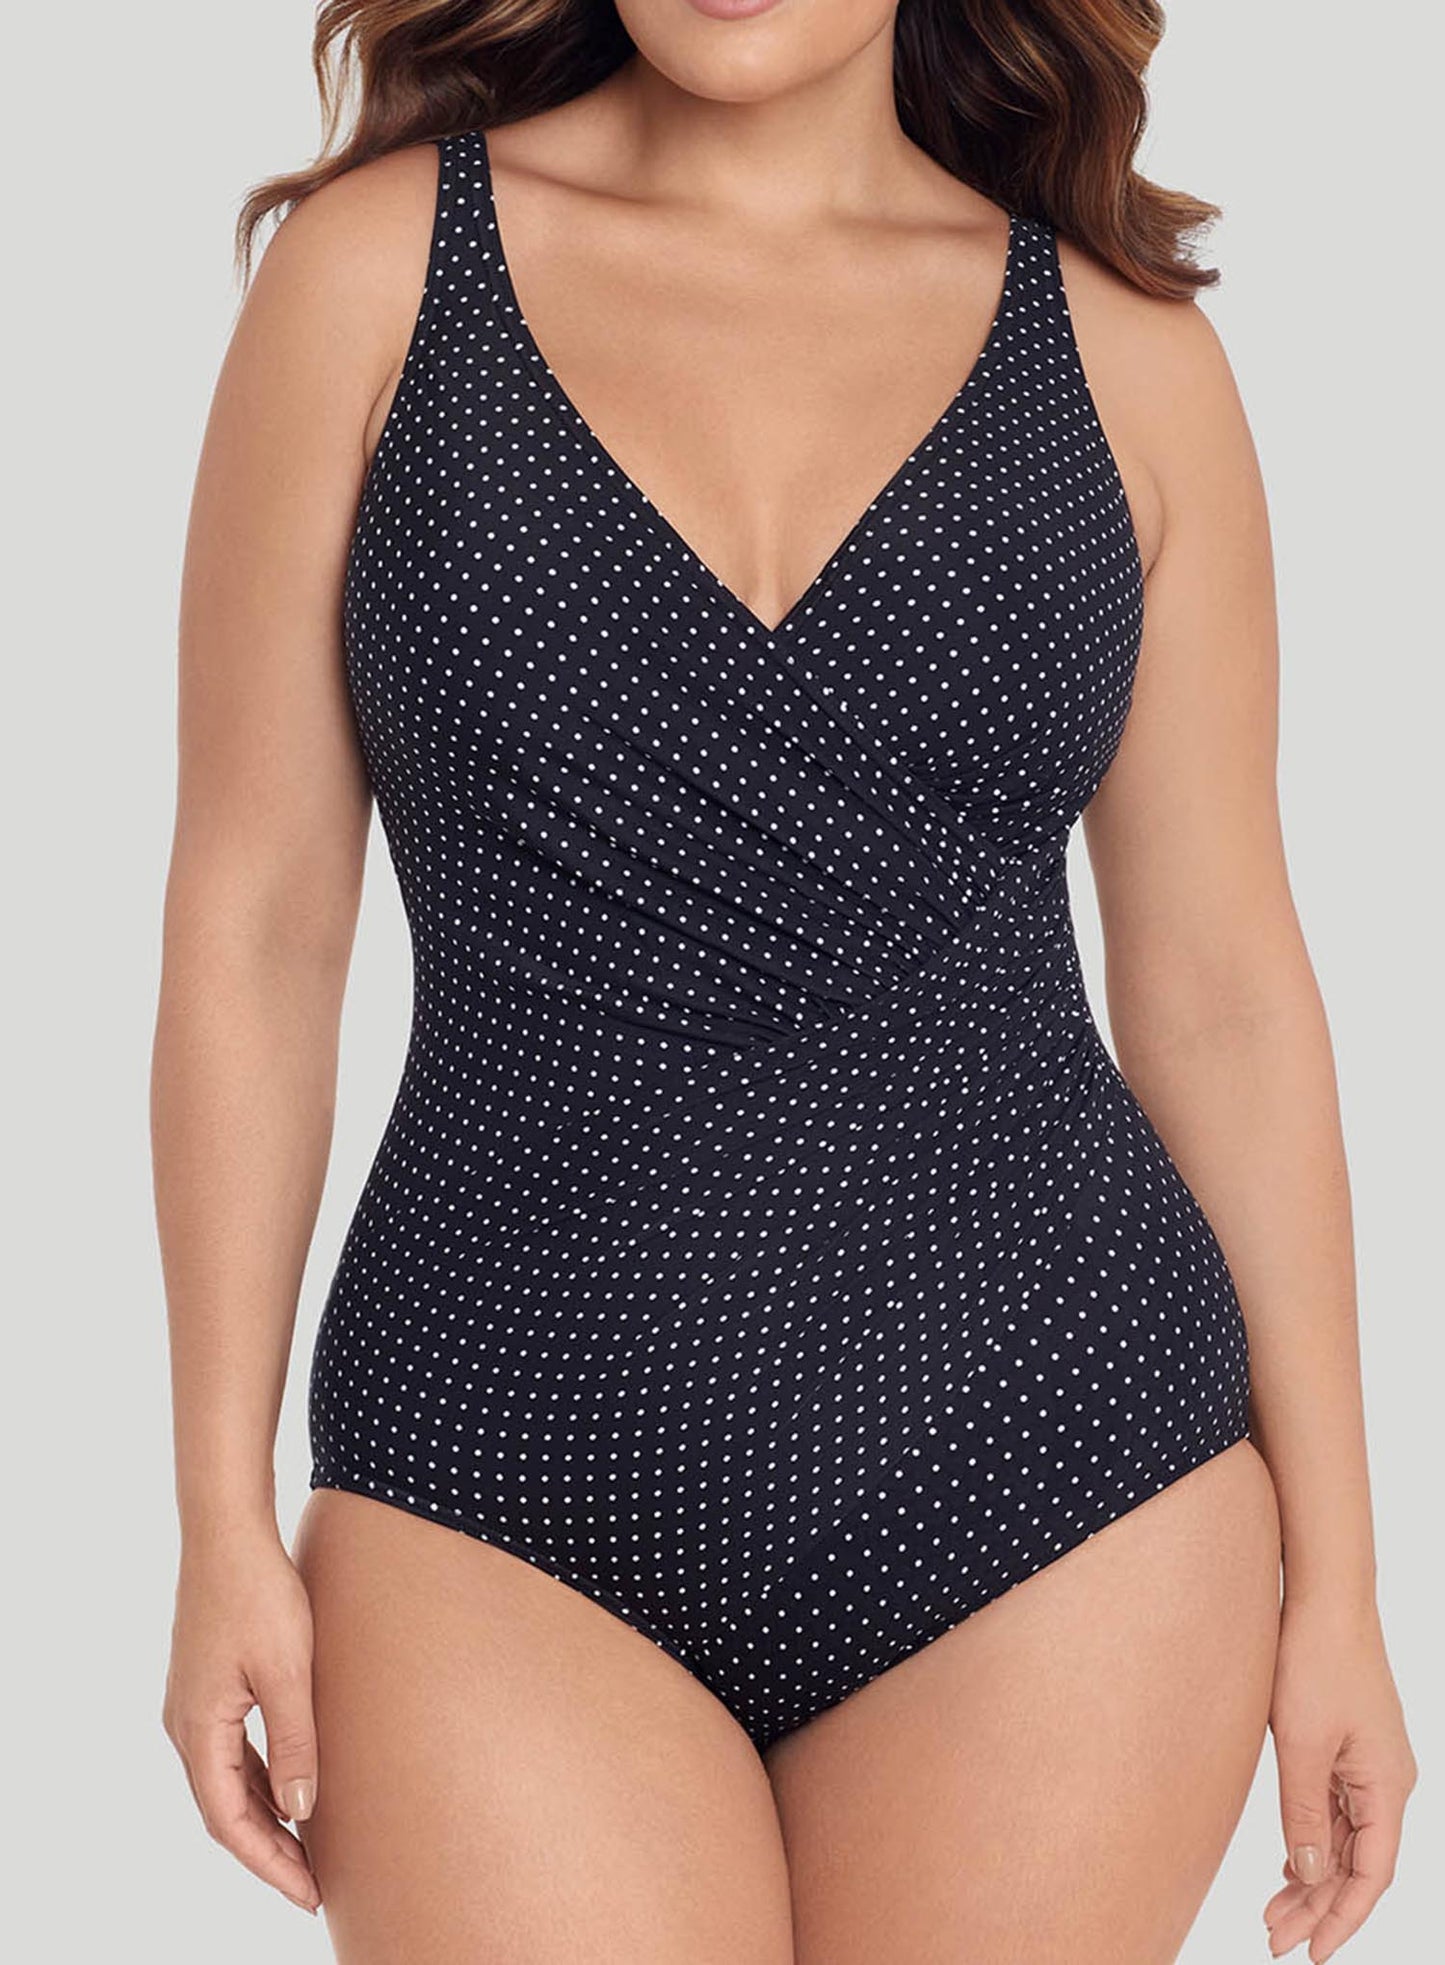 Miraclesuit Swimwear: Womens Pin Point Oceanus Soft Cup Shaping Swimsuit Black White